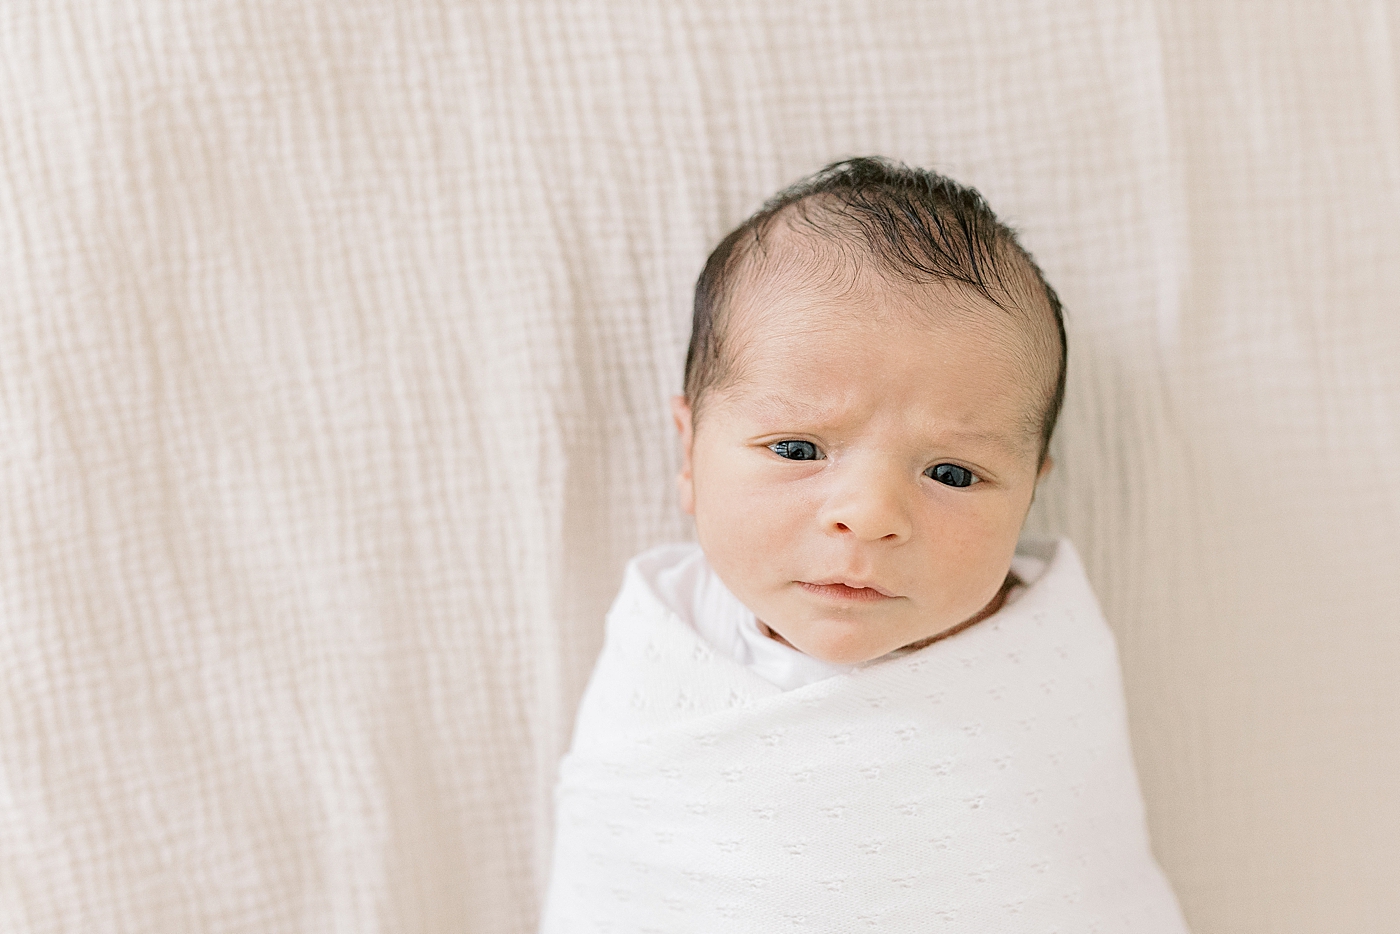 Newborn baby wrapped in a white swaddle | Photo by Caitlyn Motycka Photography